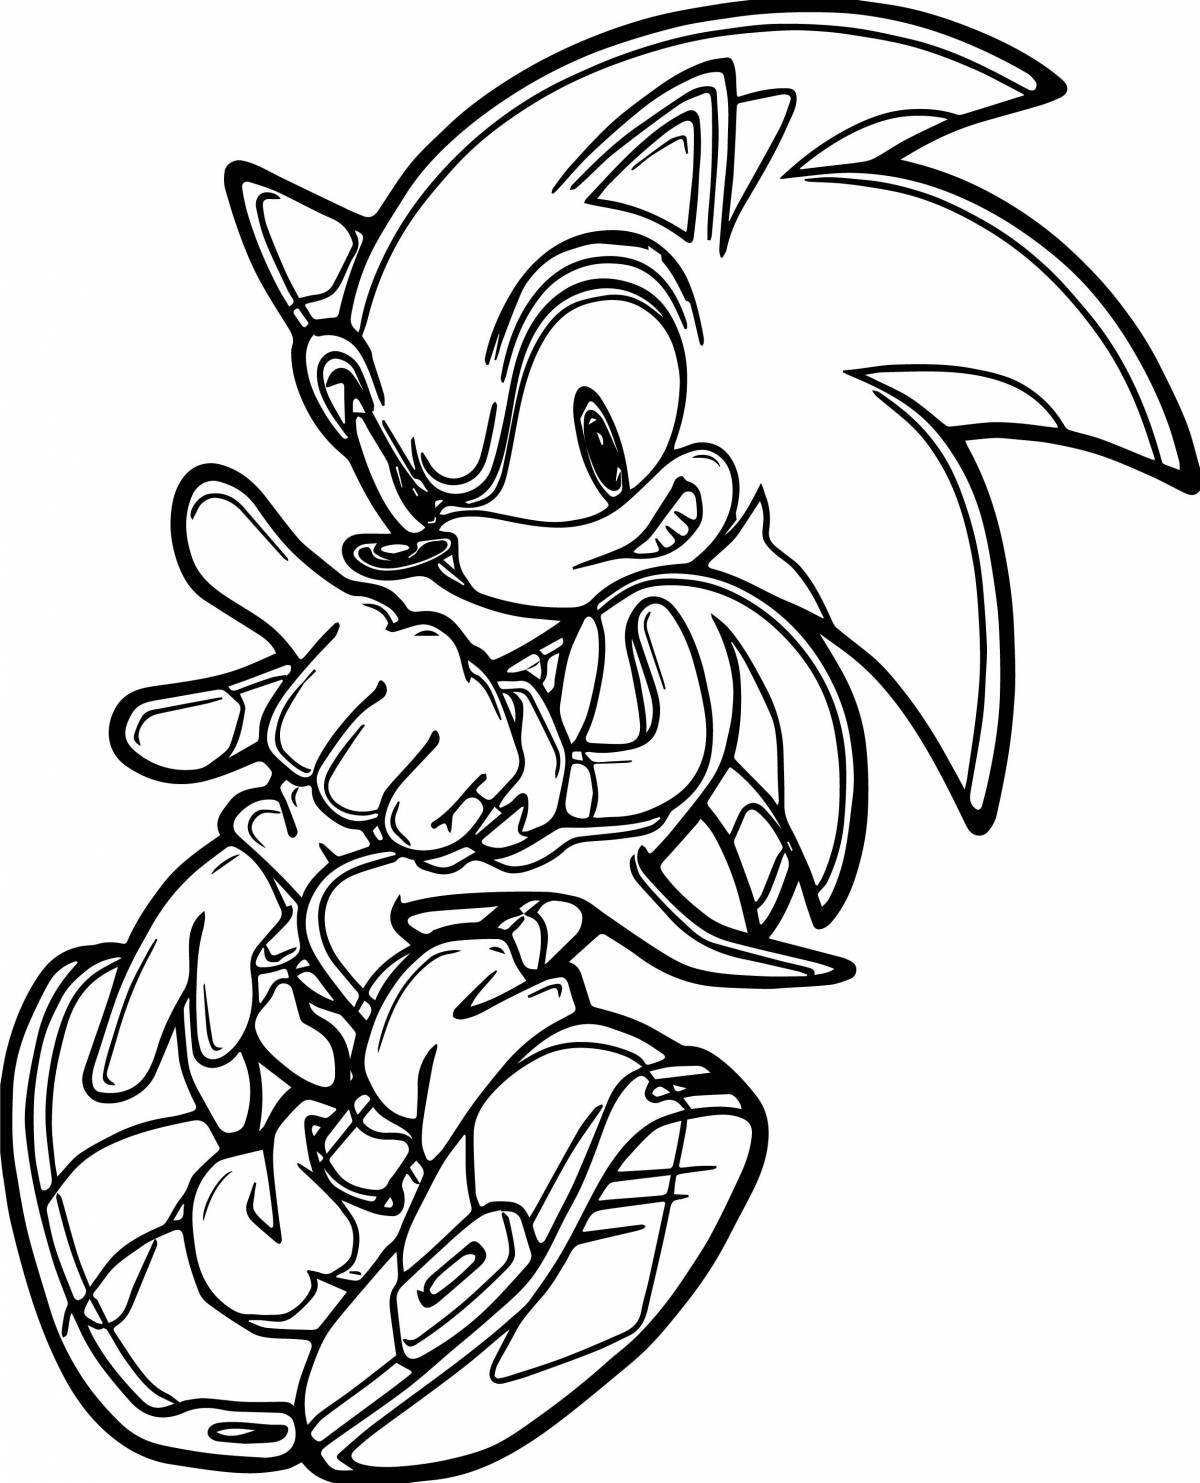 Fun xs sonic coloring page